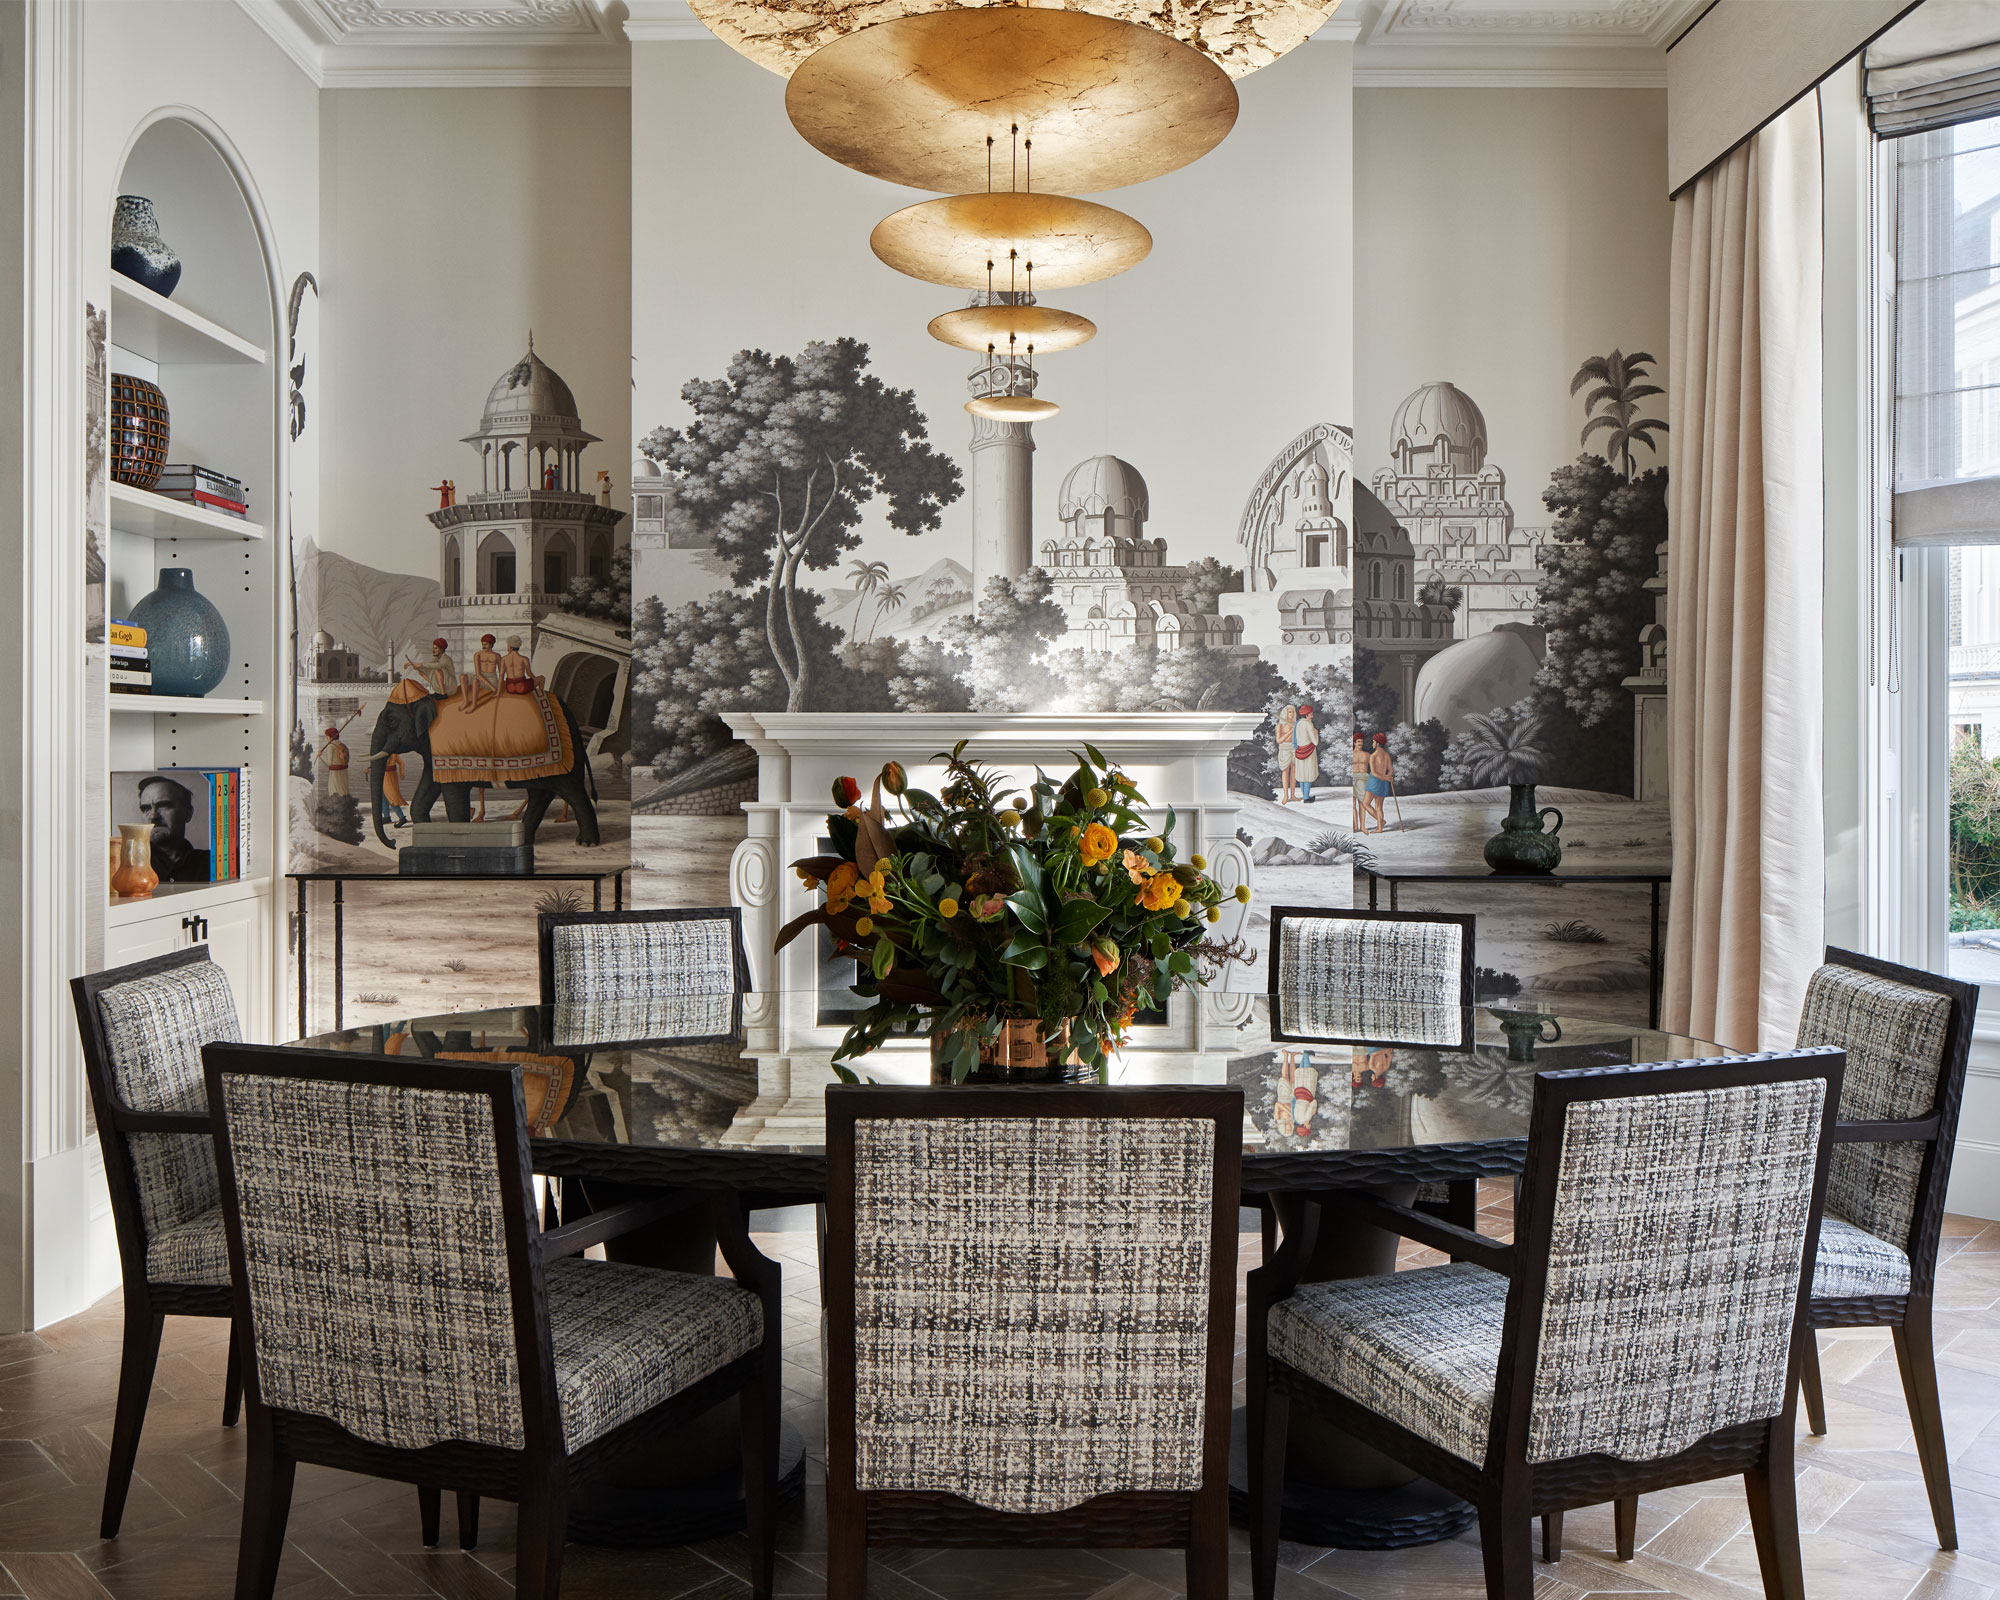 Dining room wallpaper ideas: 11 ways to decorate for drama |